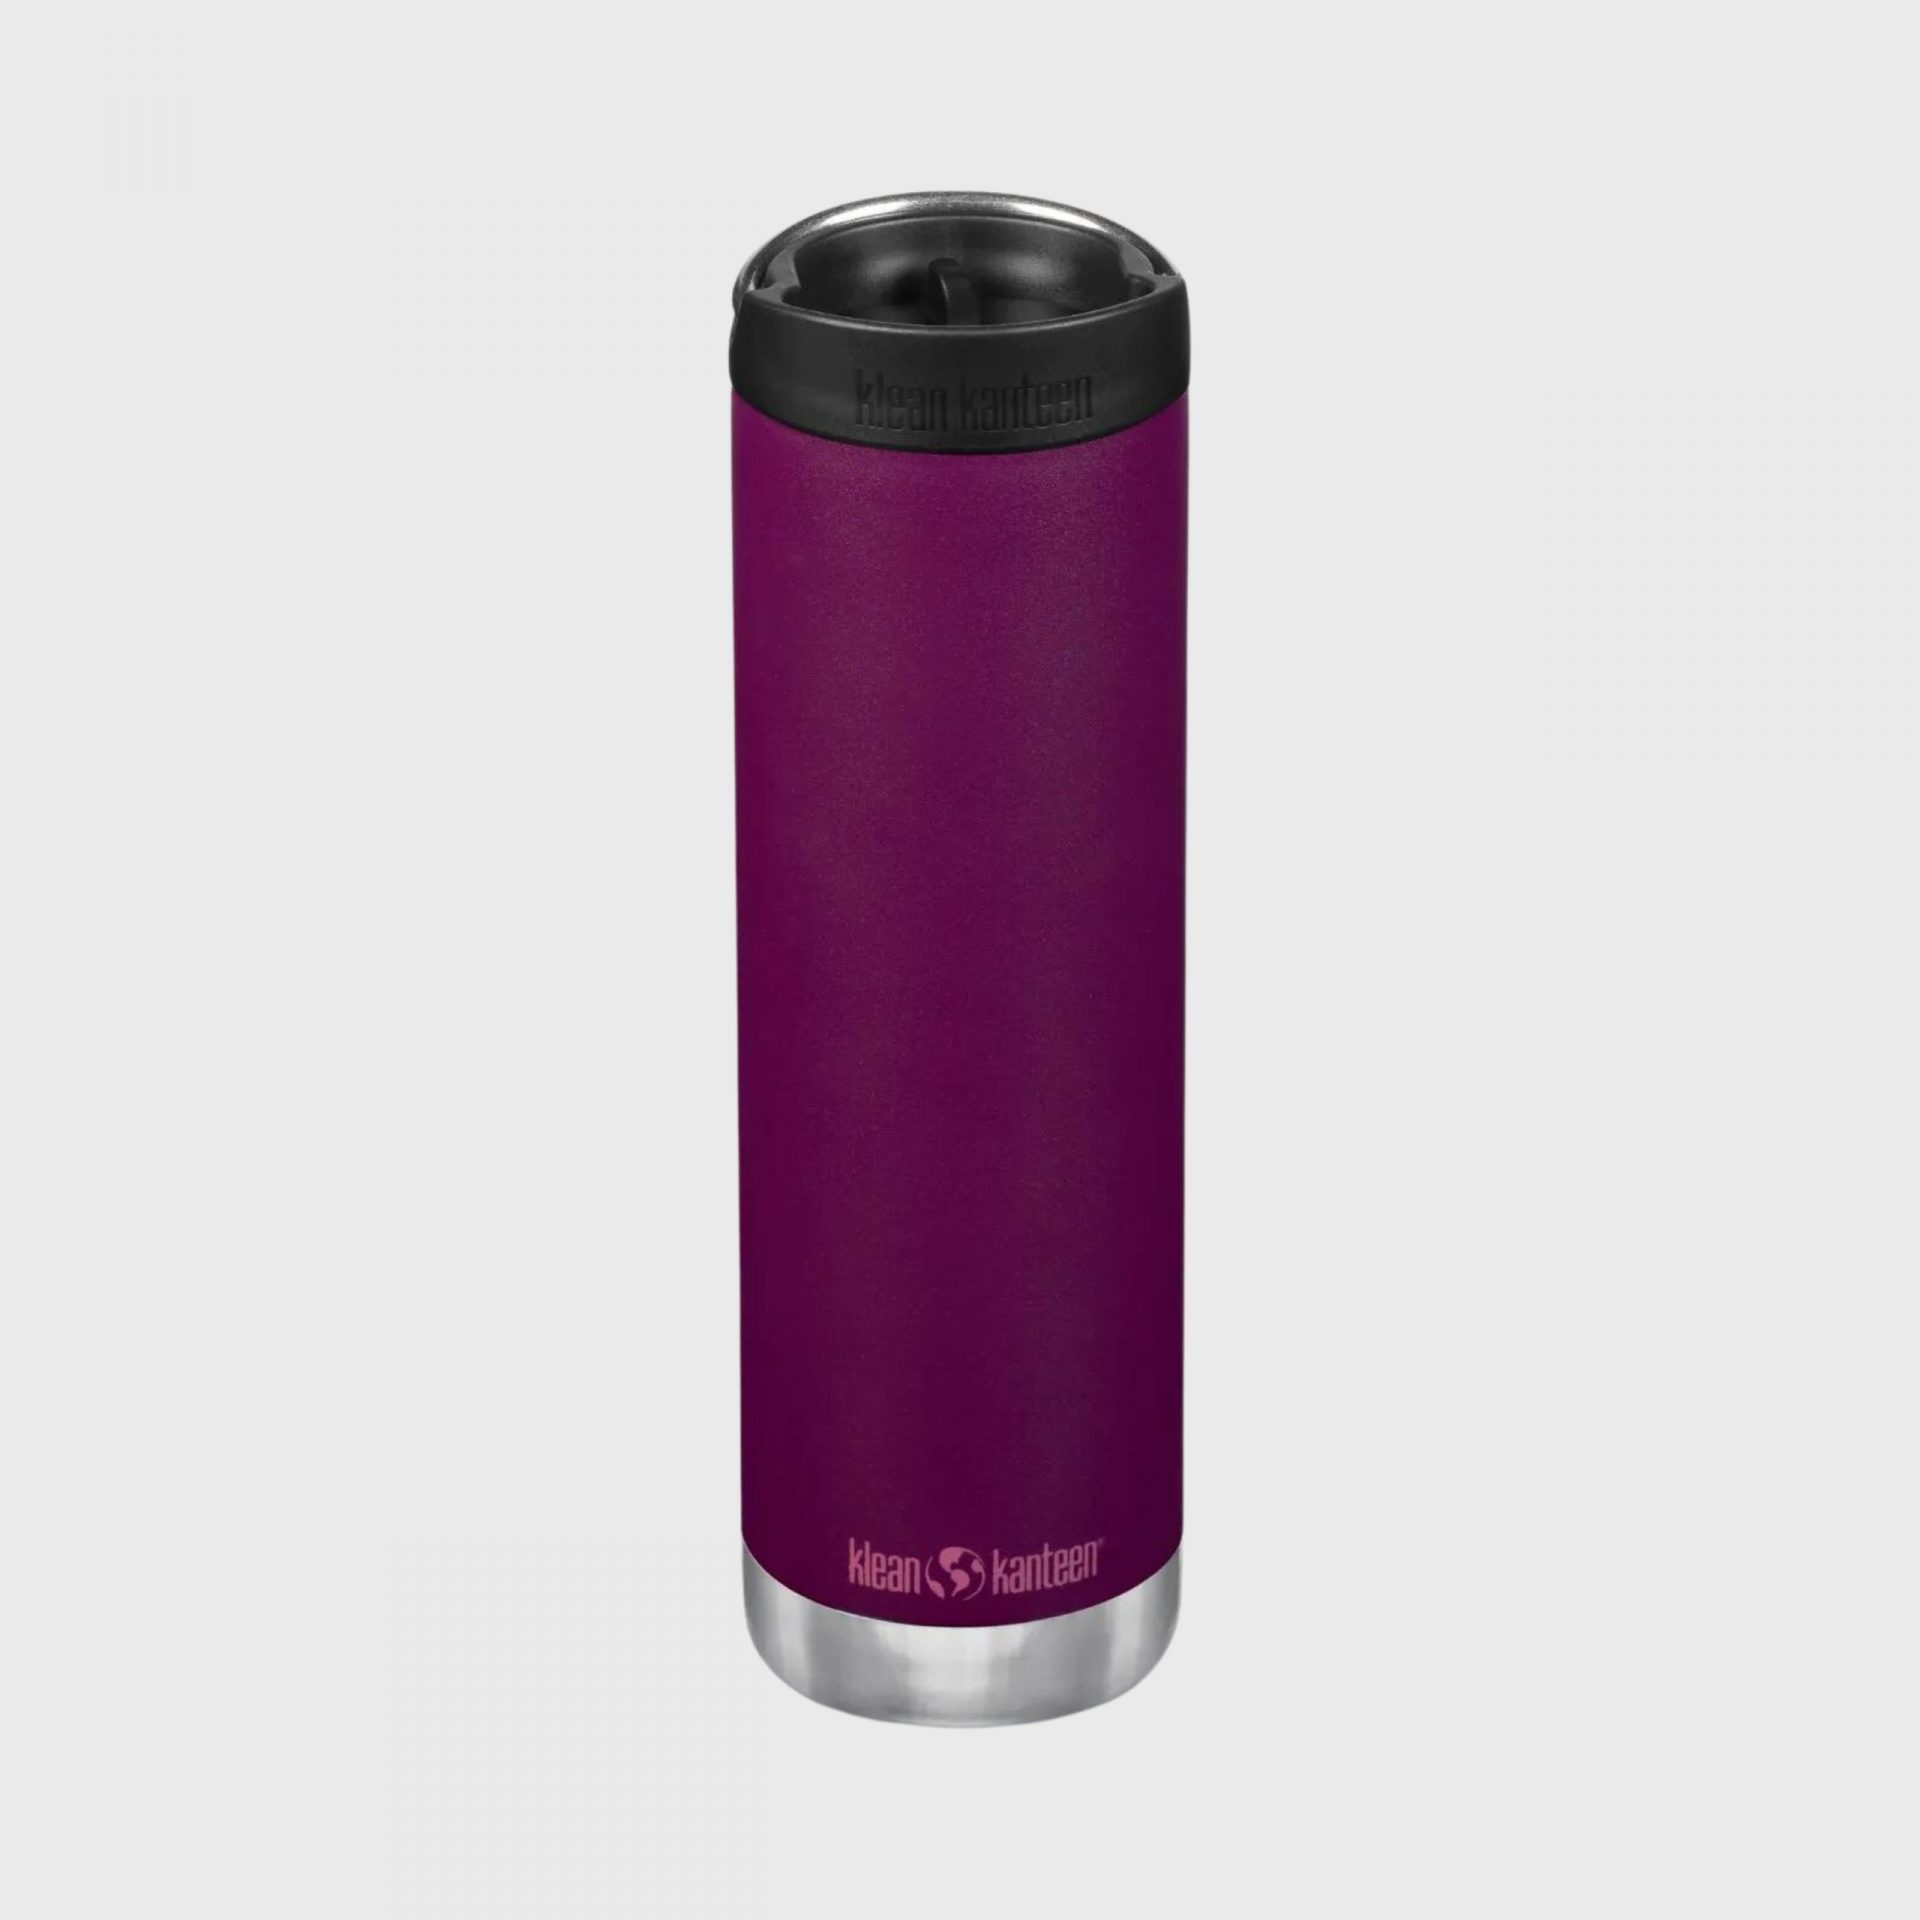 Sustainable Corporate Gifts Singapore Klean Kanteen Insulated TKWide 20oz Water Bottle with Cafe Cap Purple Potion